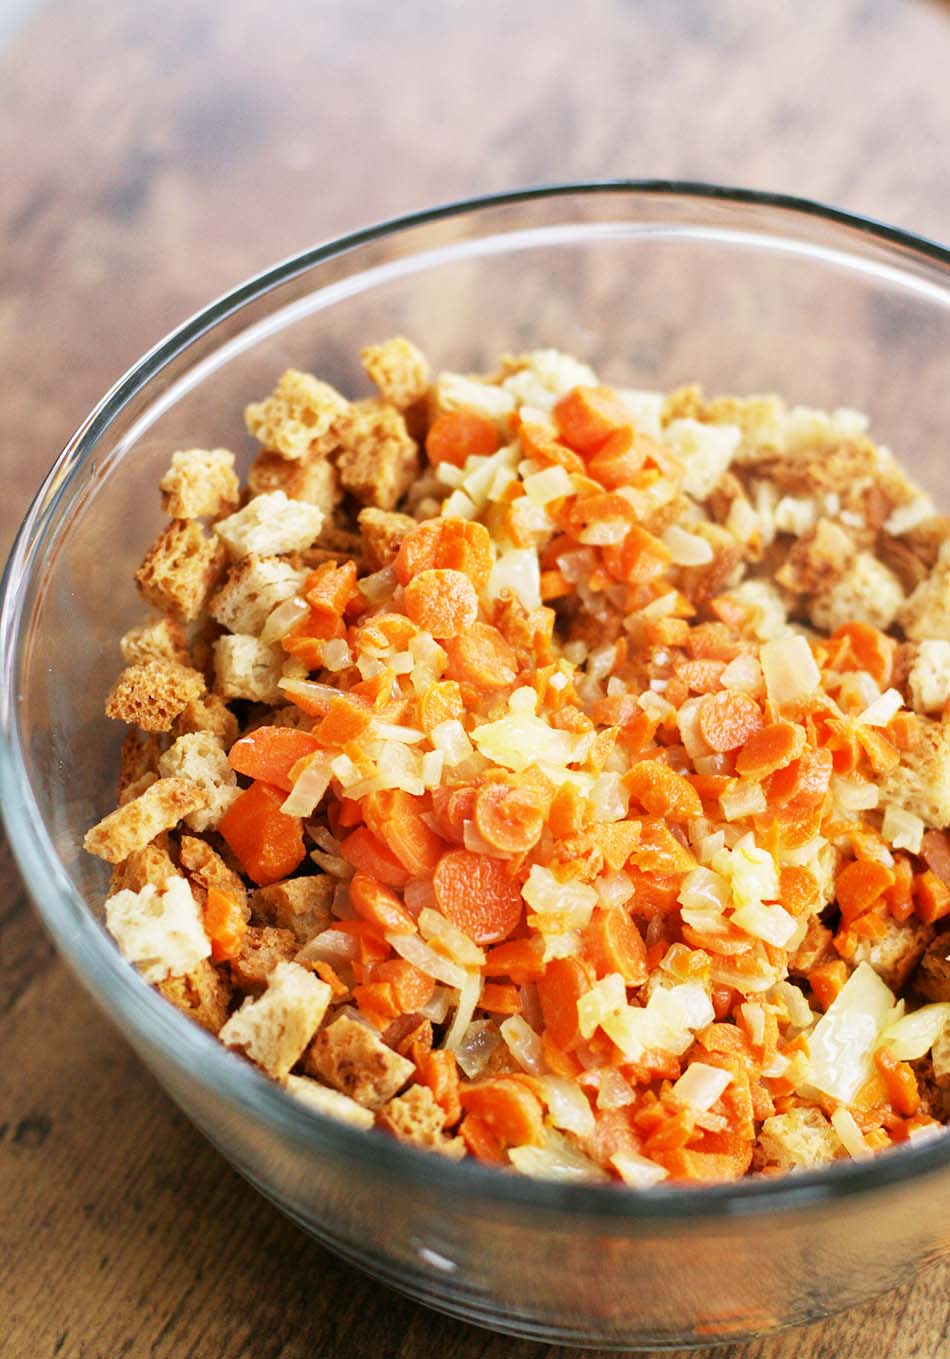 Adding sautéed carrots and onions to boxed stuffing is a simple and inexpensive upgrade.